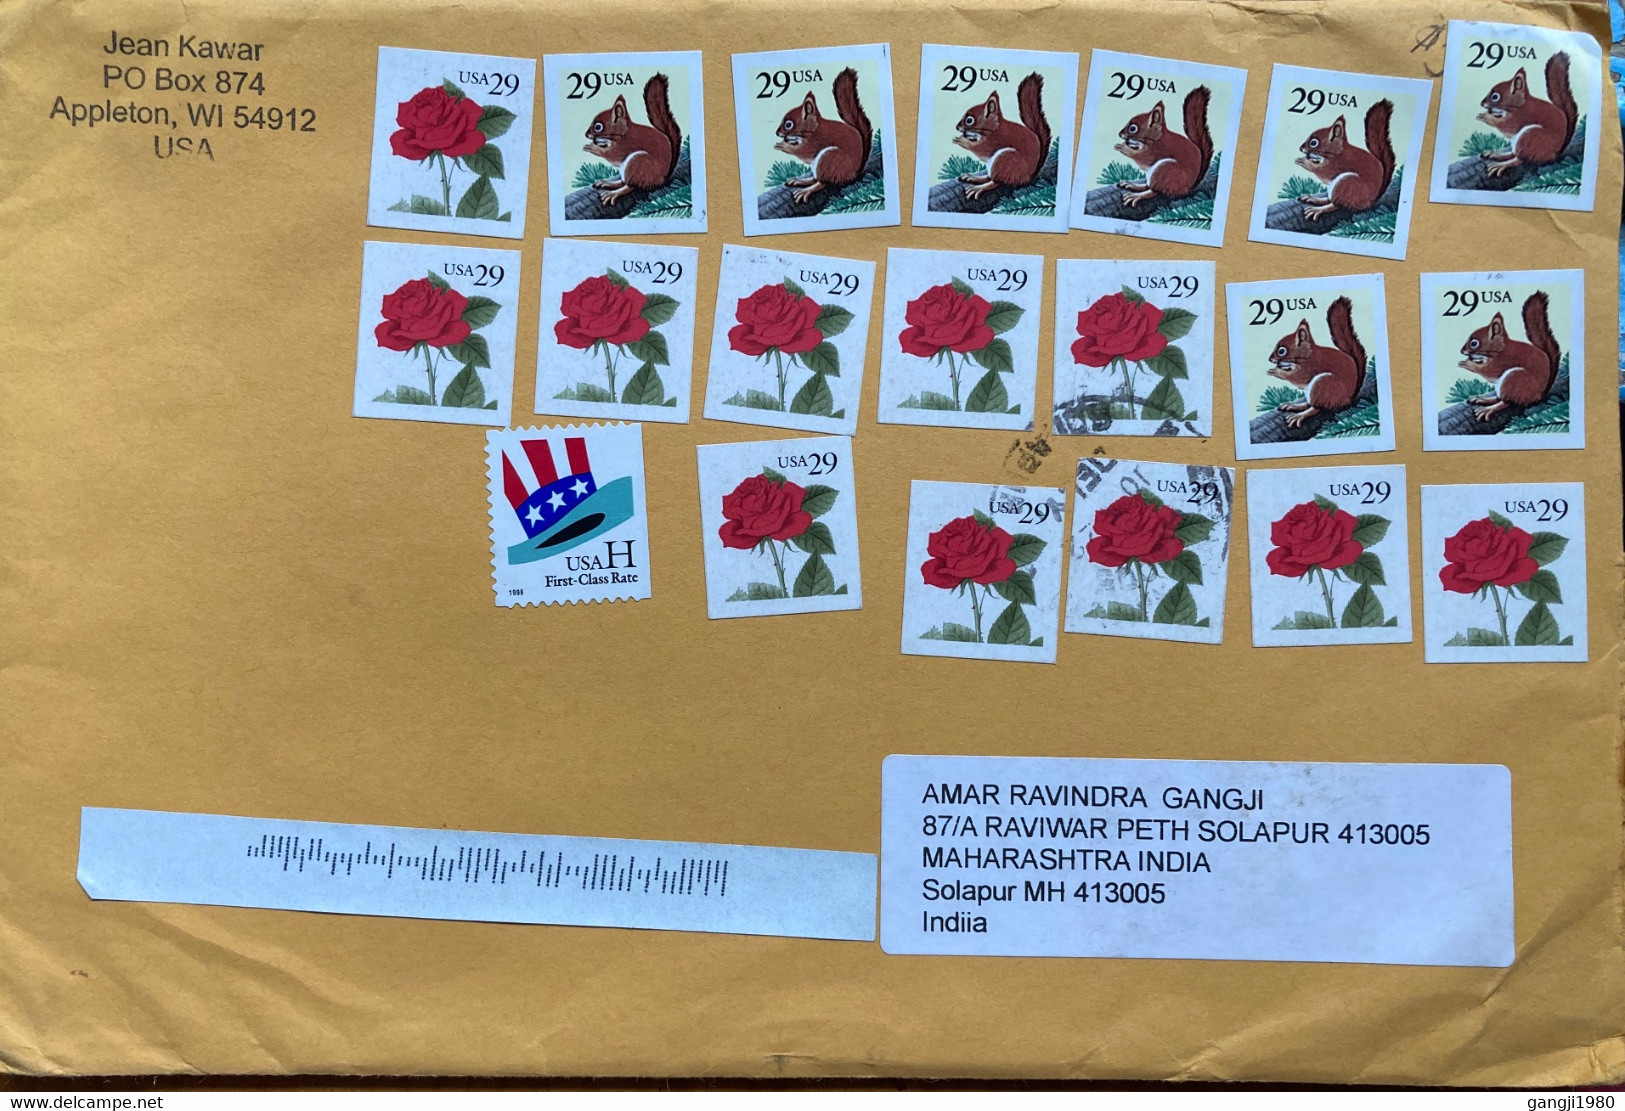 USA 2022, SQUAREL, FLOWER ROSE TO TOTAL 20 STAMPS!! 16 STAMPS FV 4.60$ WITHOUT CANCELLATION COVER USED TO INDIA - Briefe U. Dokumente